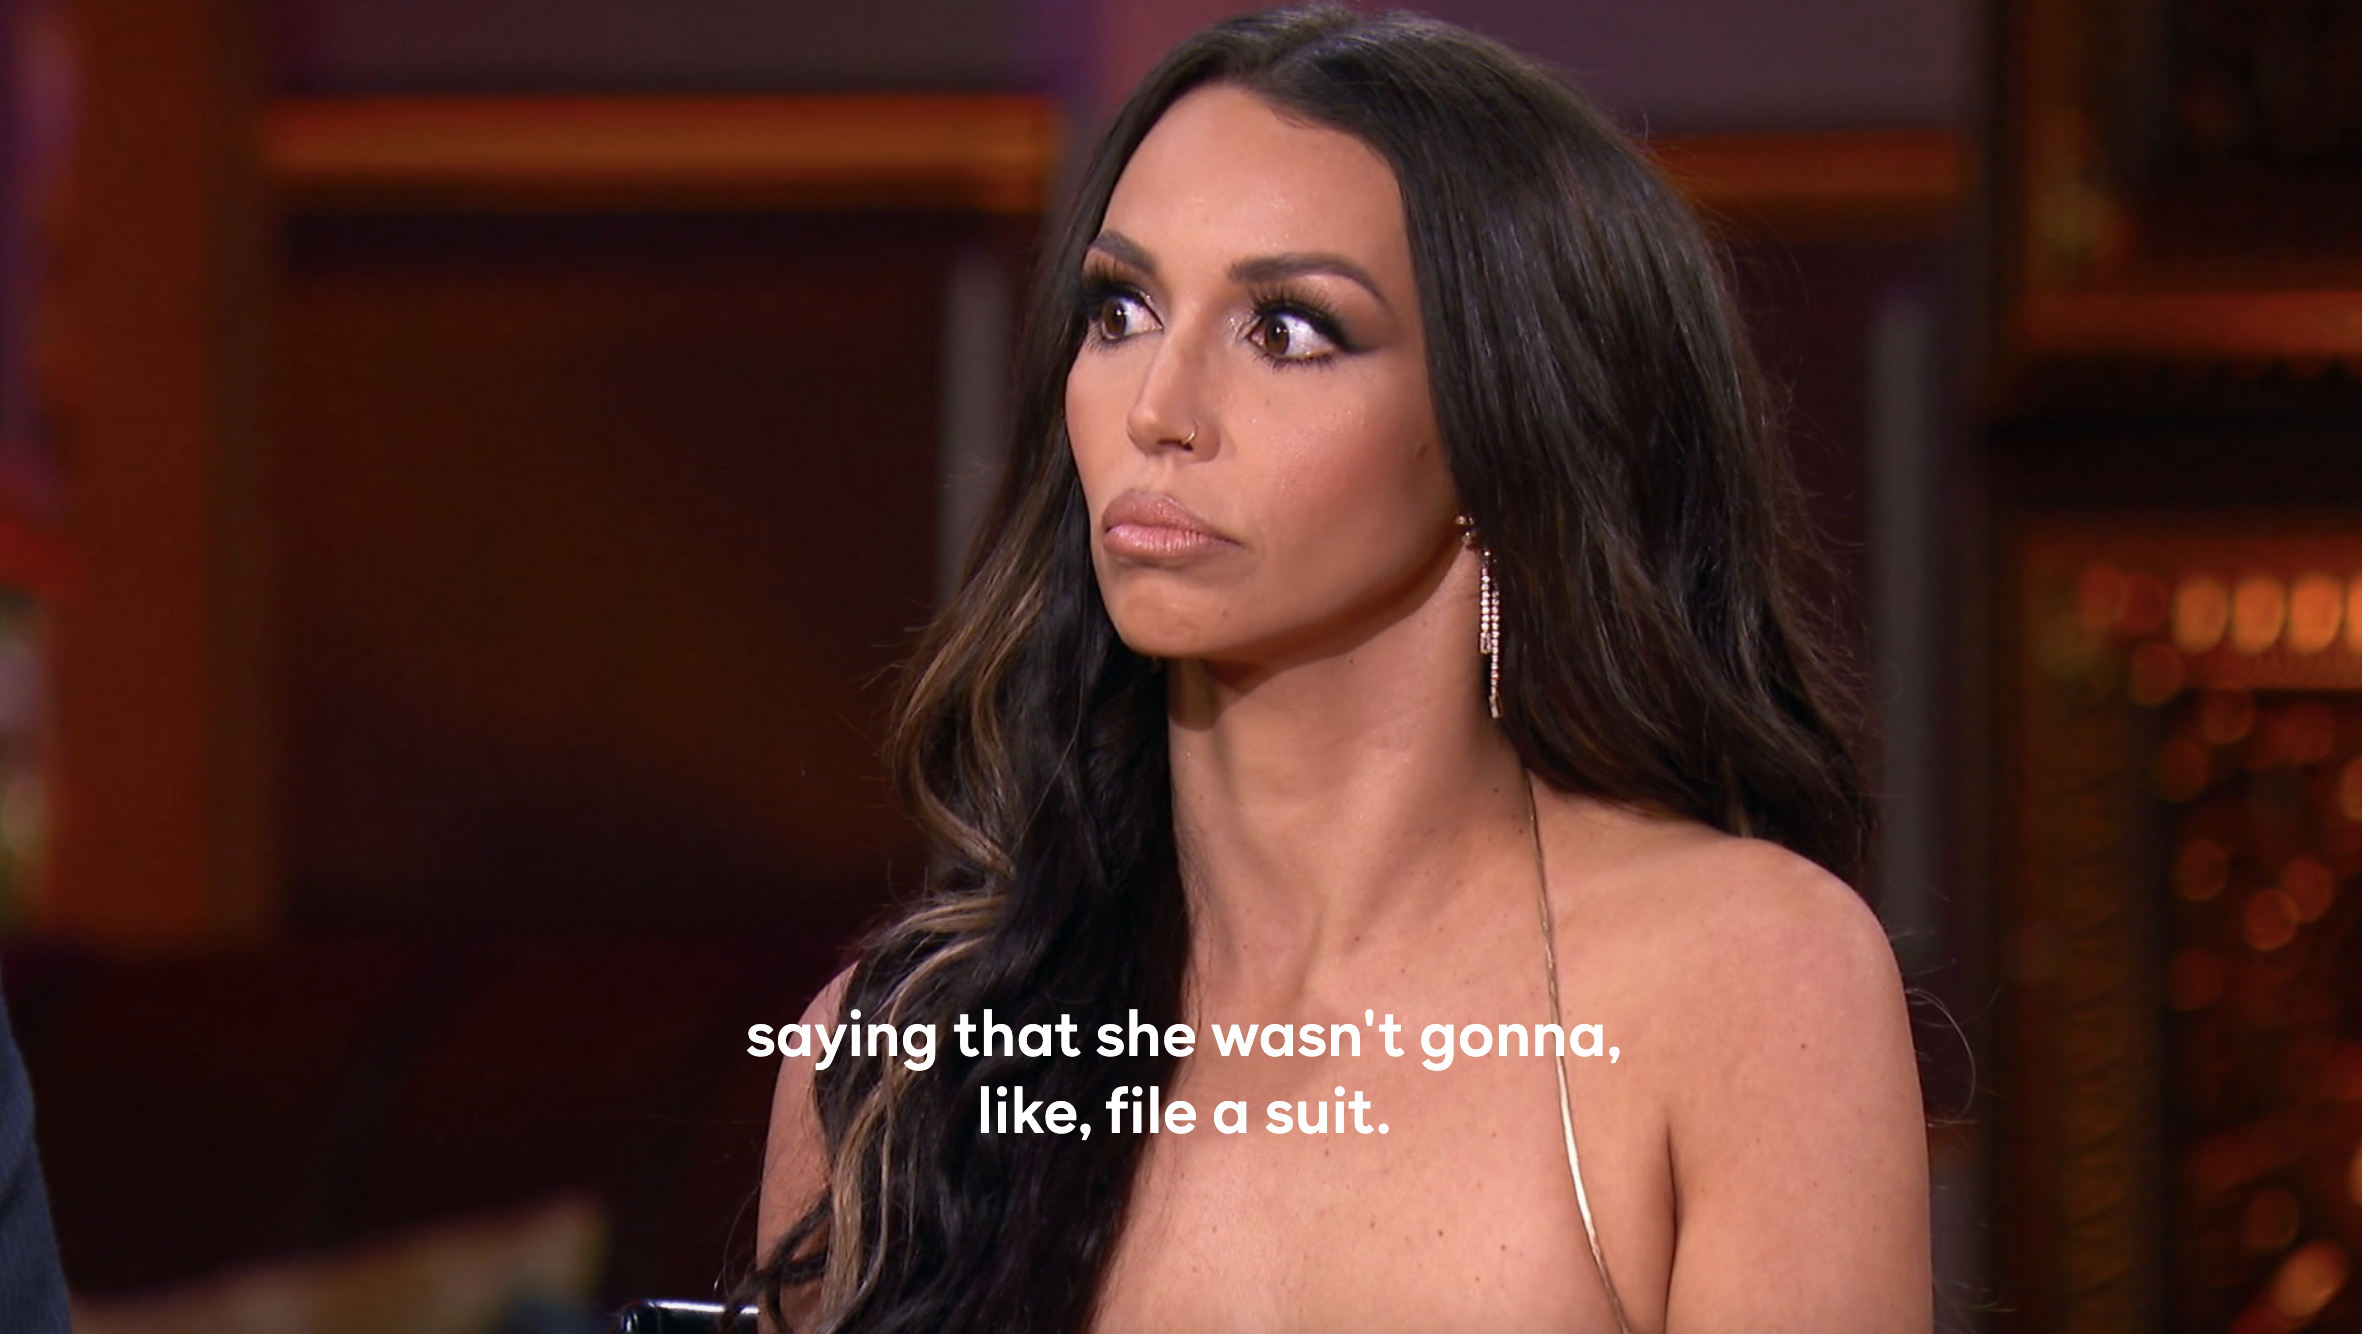 Scheana with her eyes wide on stage while Tom Sandoval speaks